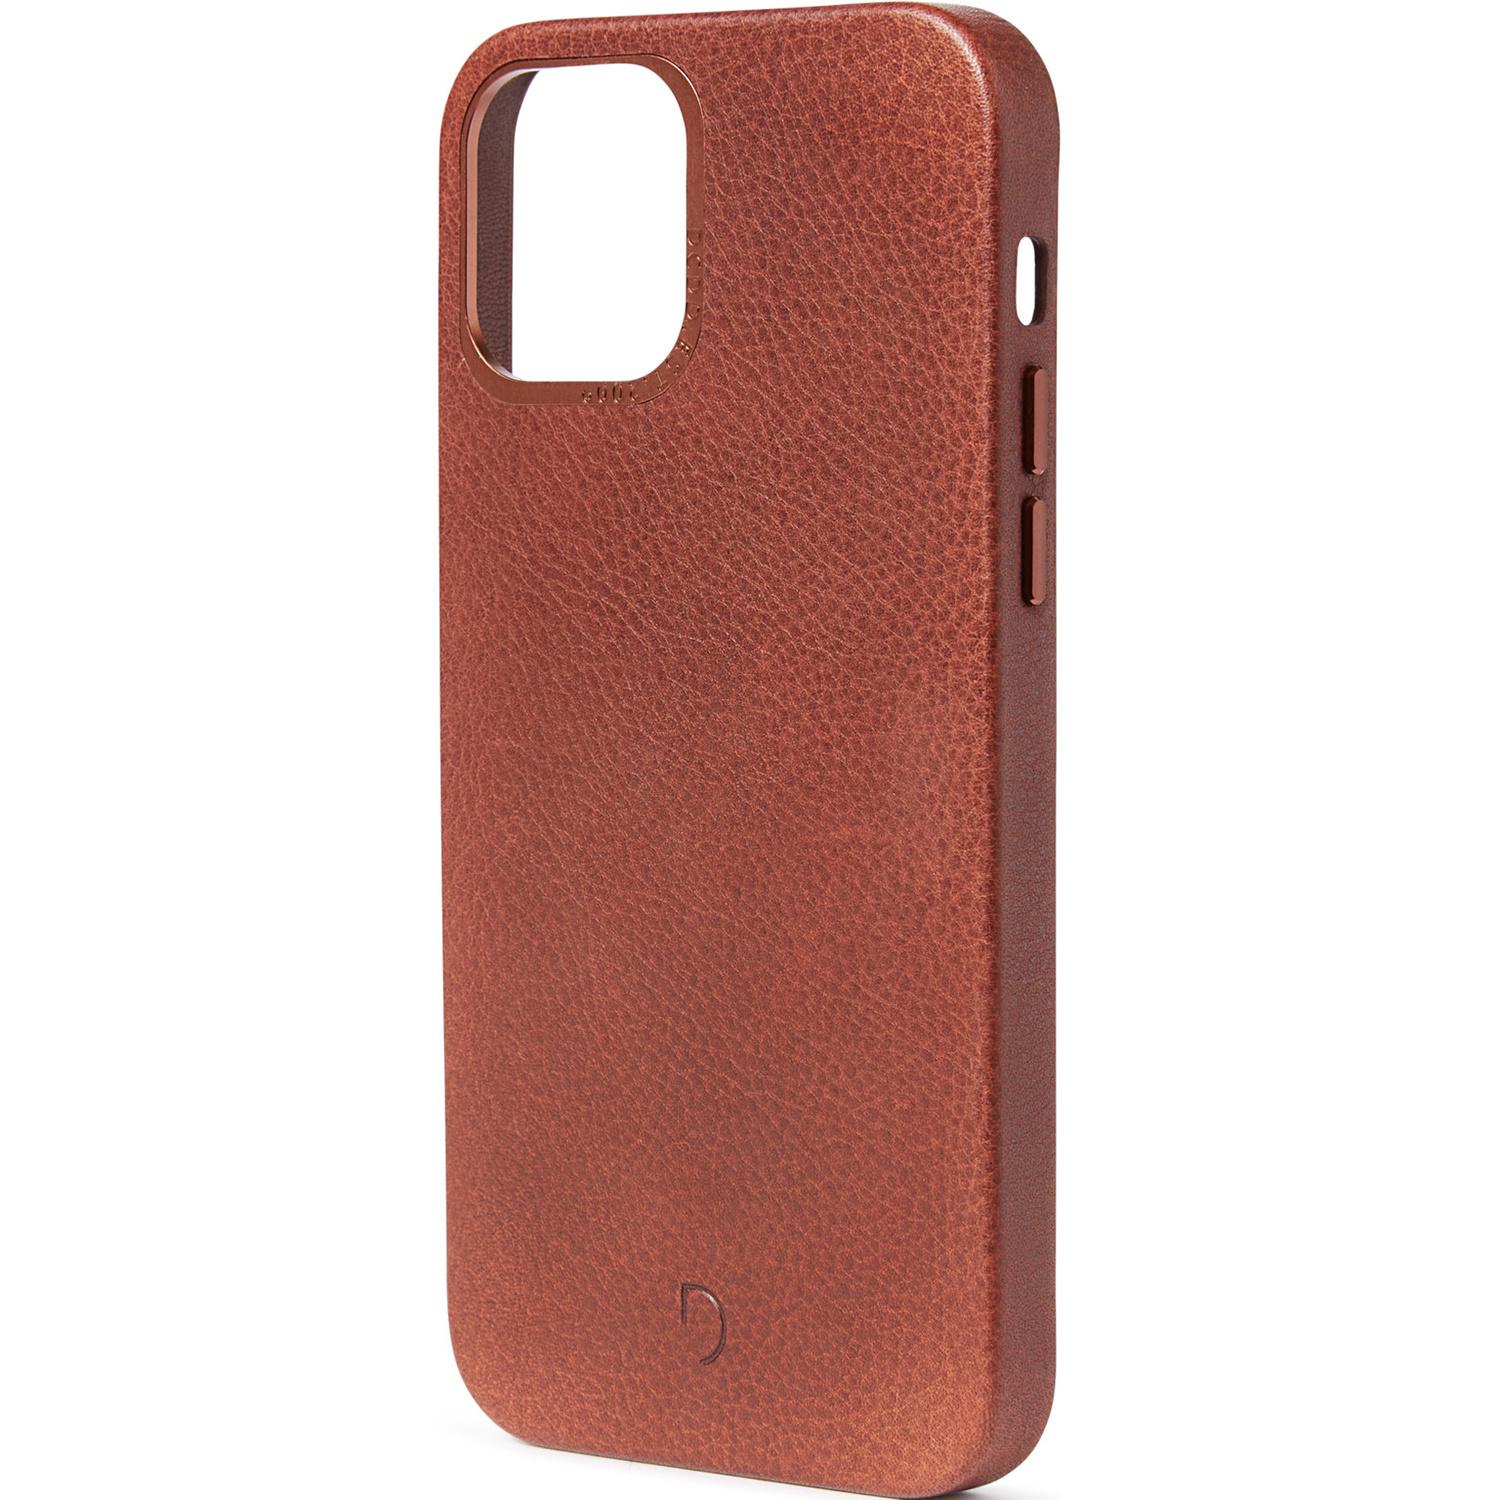 Leather Backcover MagSafe iPhone 12 Pro Max - Bruin - Bruin / Brown - Decoded